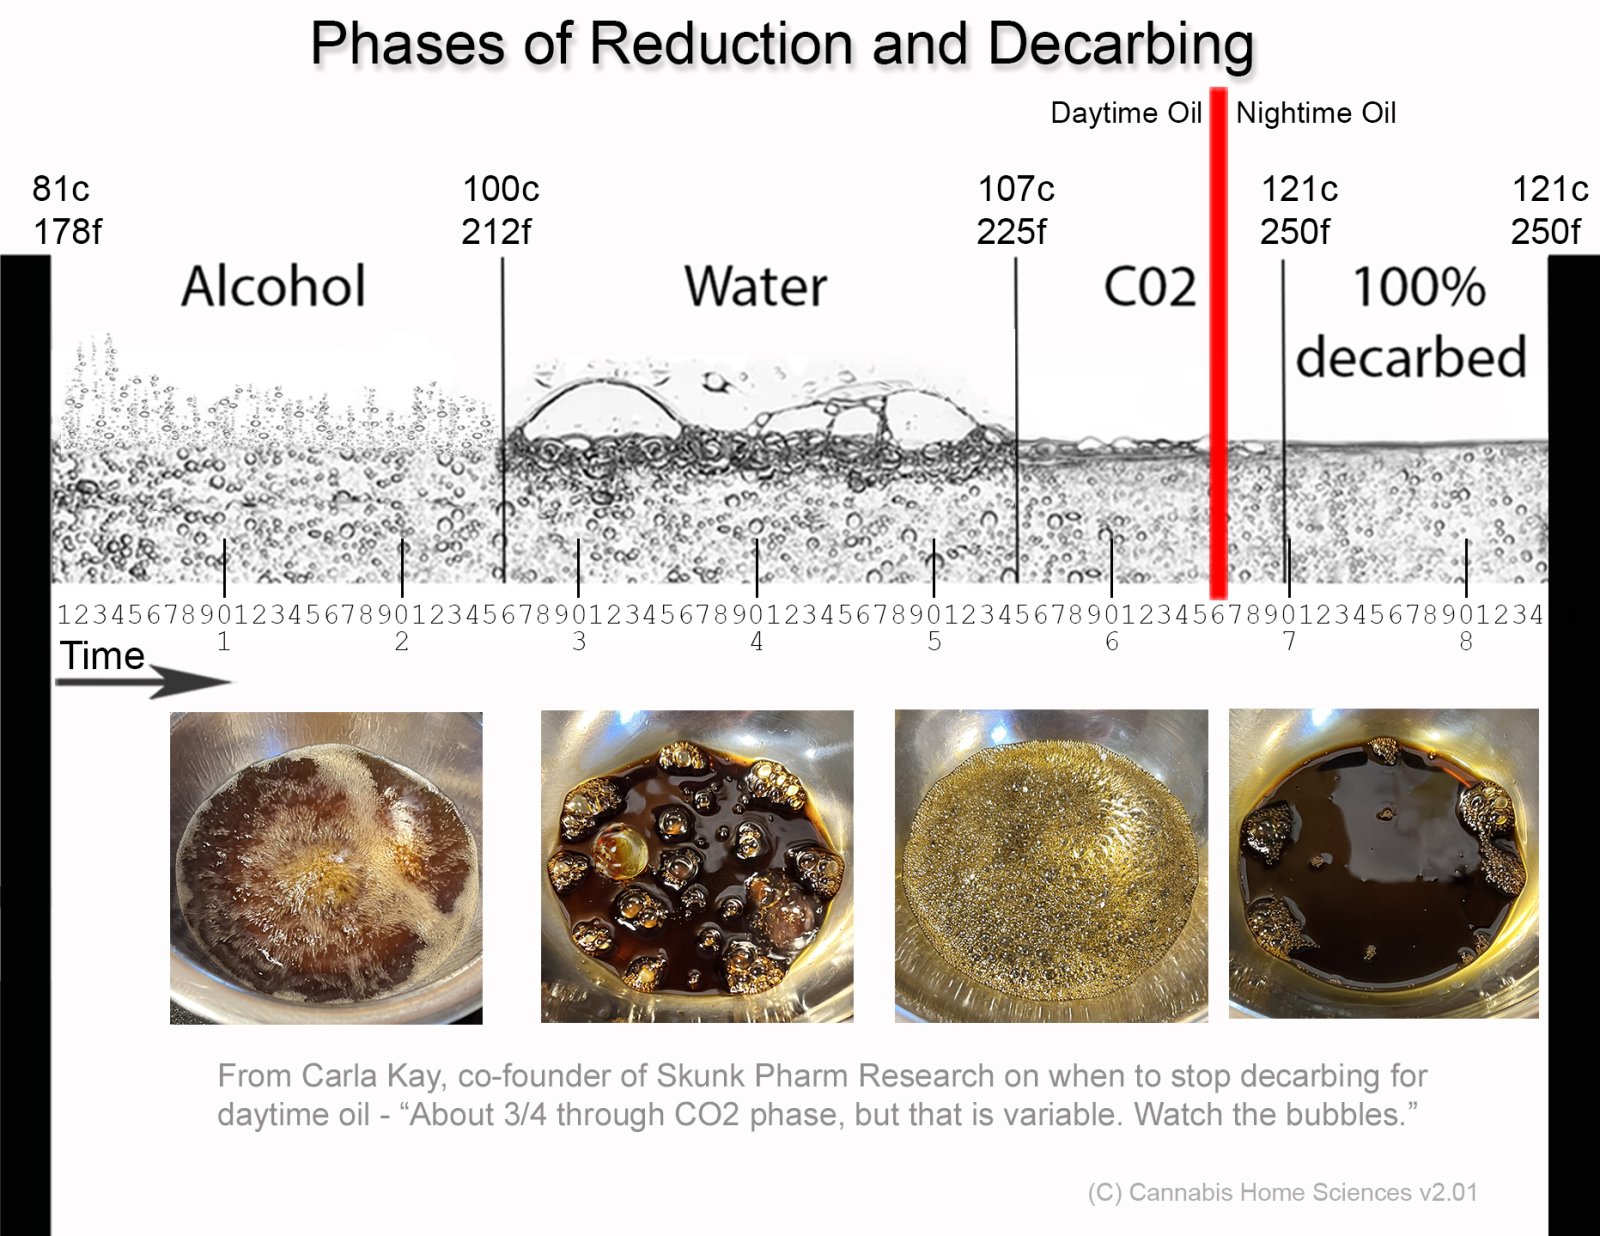 Chrt-Reduction and Decarbing Phases 04 Large.jpg